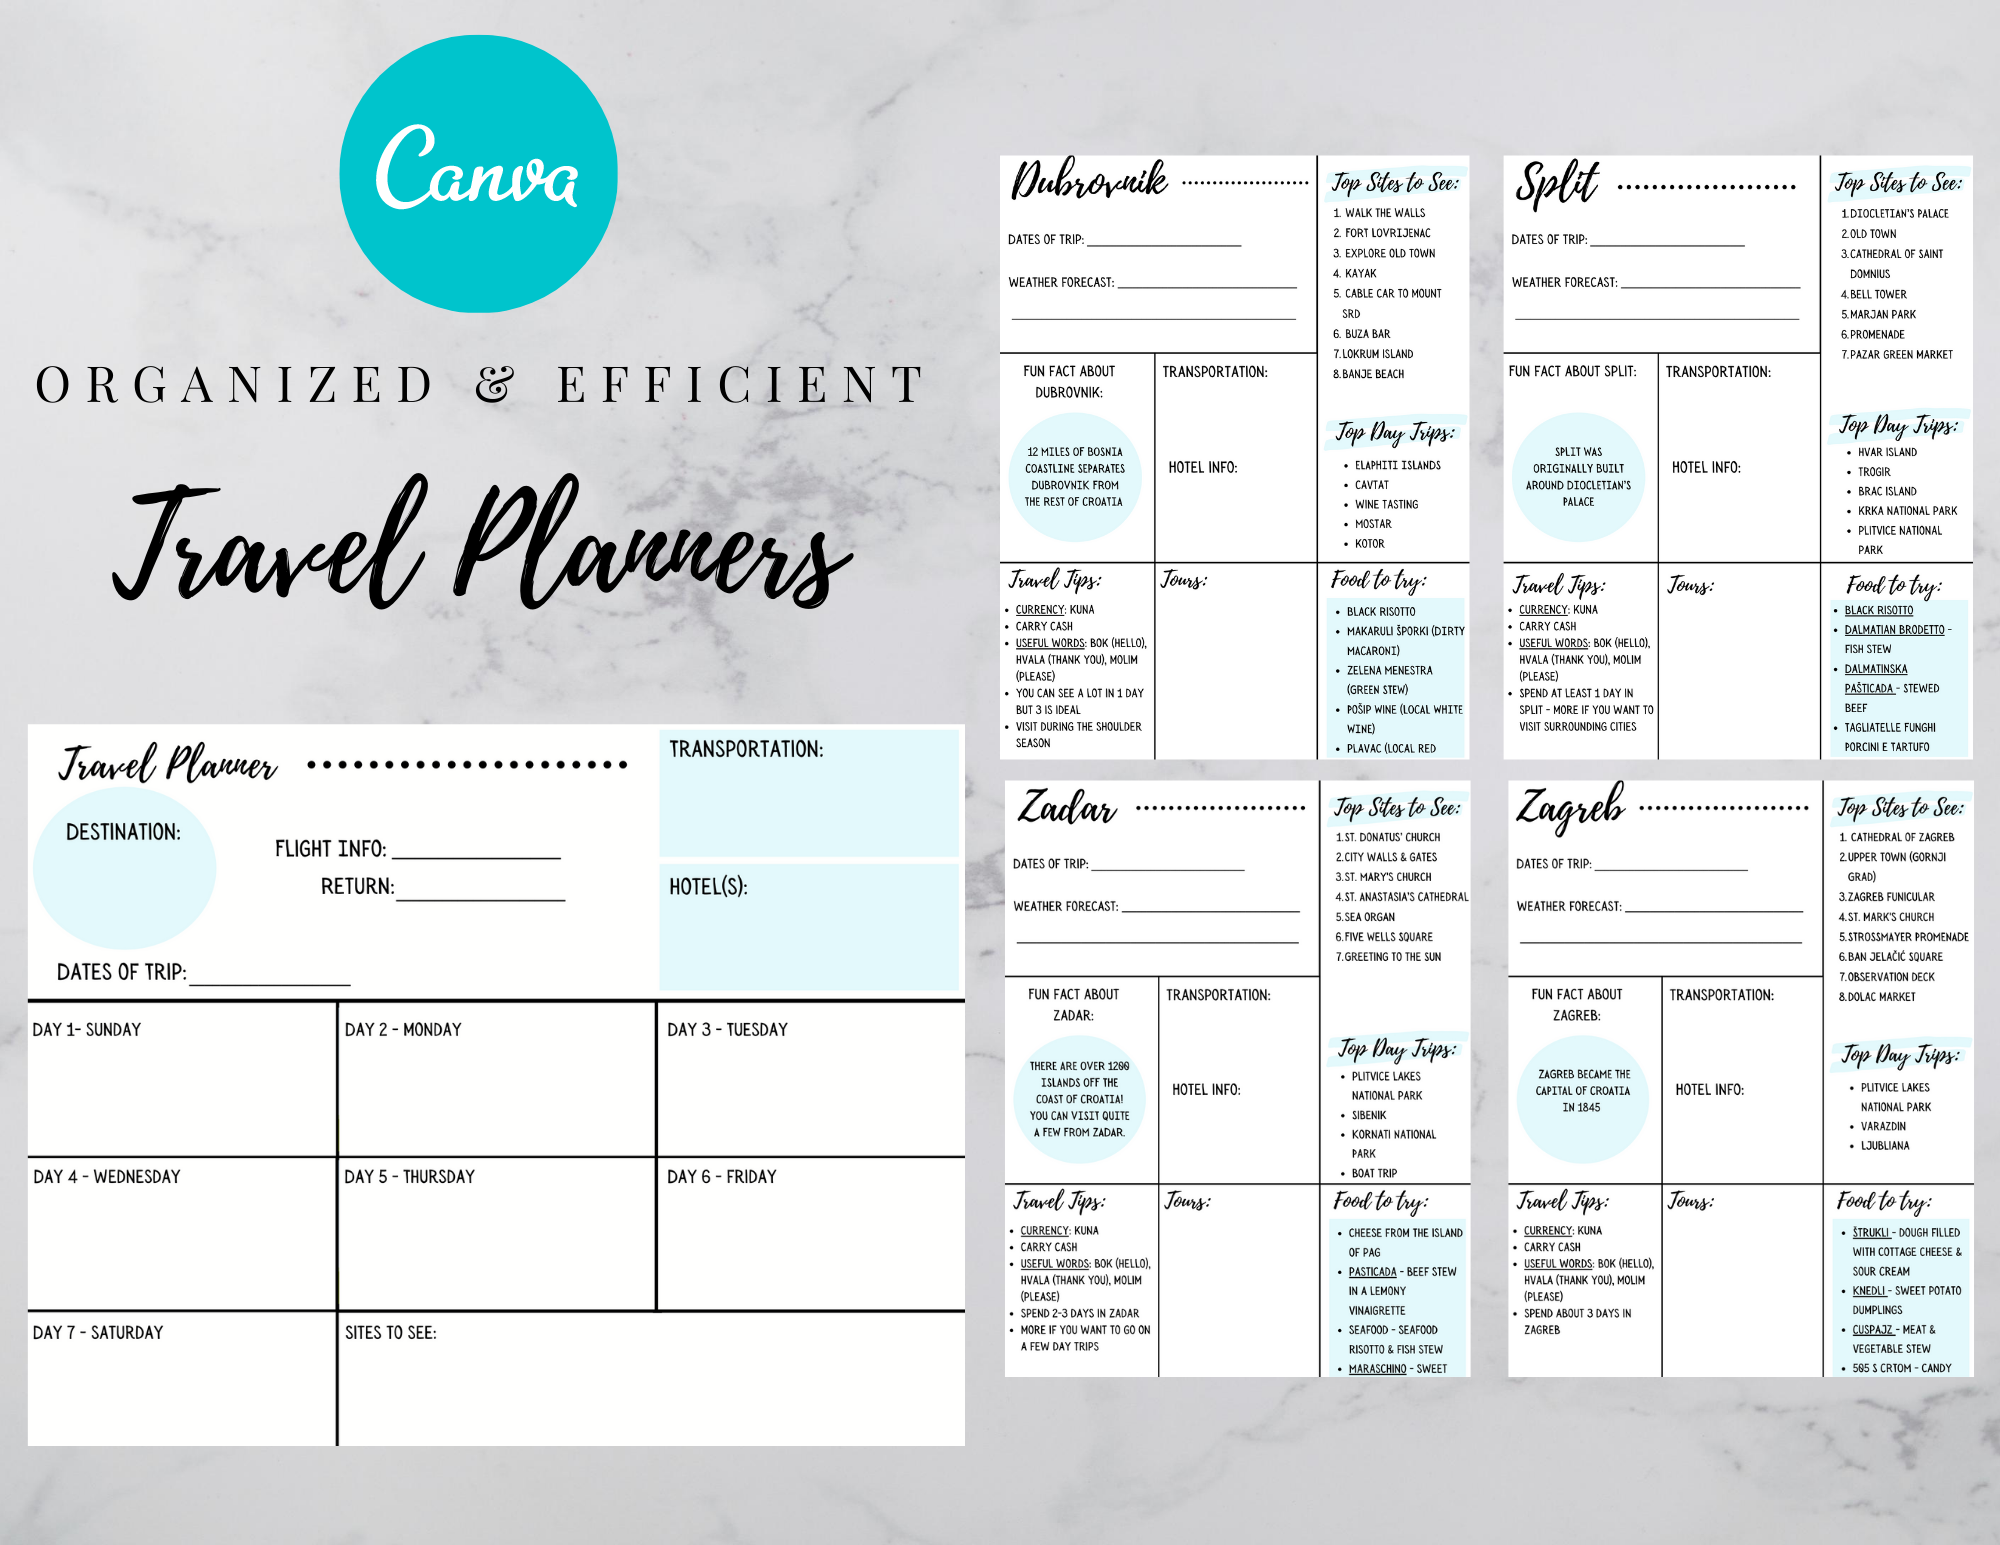 A few templates included in the croatia travel planner pack